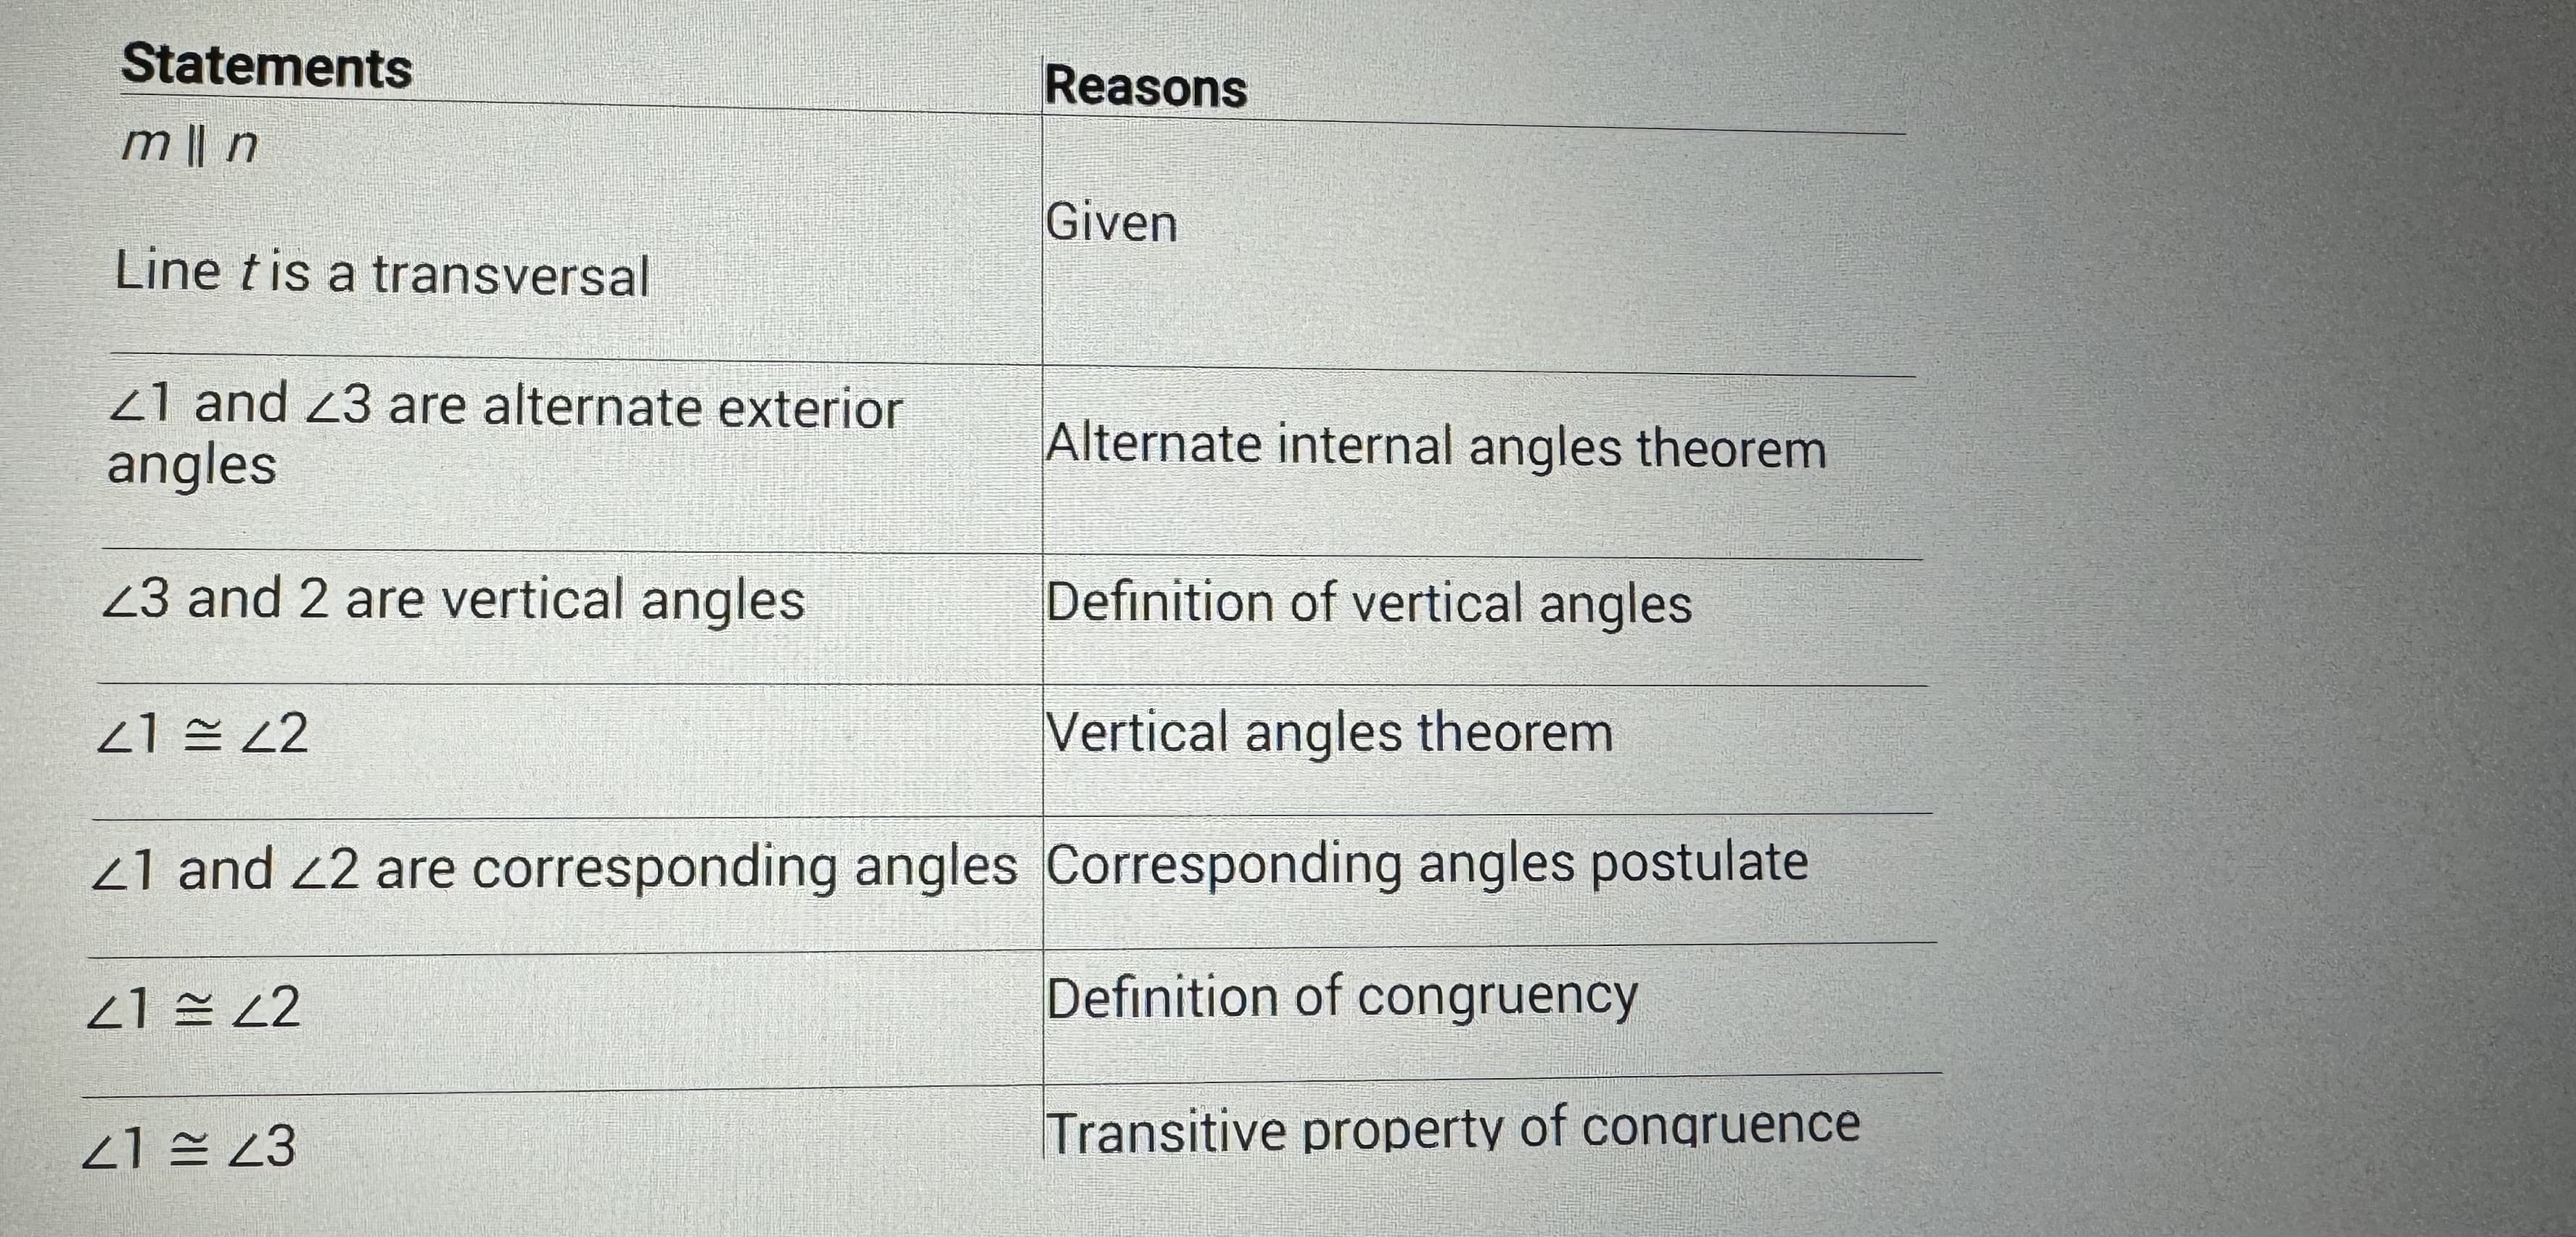 Statements
ml|n
Line tis a transversal
21 and 23 are alternate exterior
angles
23 and 2 are vertical angles
21 = 42
21 22
Reasons
Definition of vertical angles
Vertical angles theorem
21 and 22 are corresponding angles Corresponding angles postulate
Definition of congruency
Transitive property of congruence
21 = 23
Given
Alternate internal angles theorem